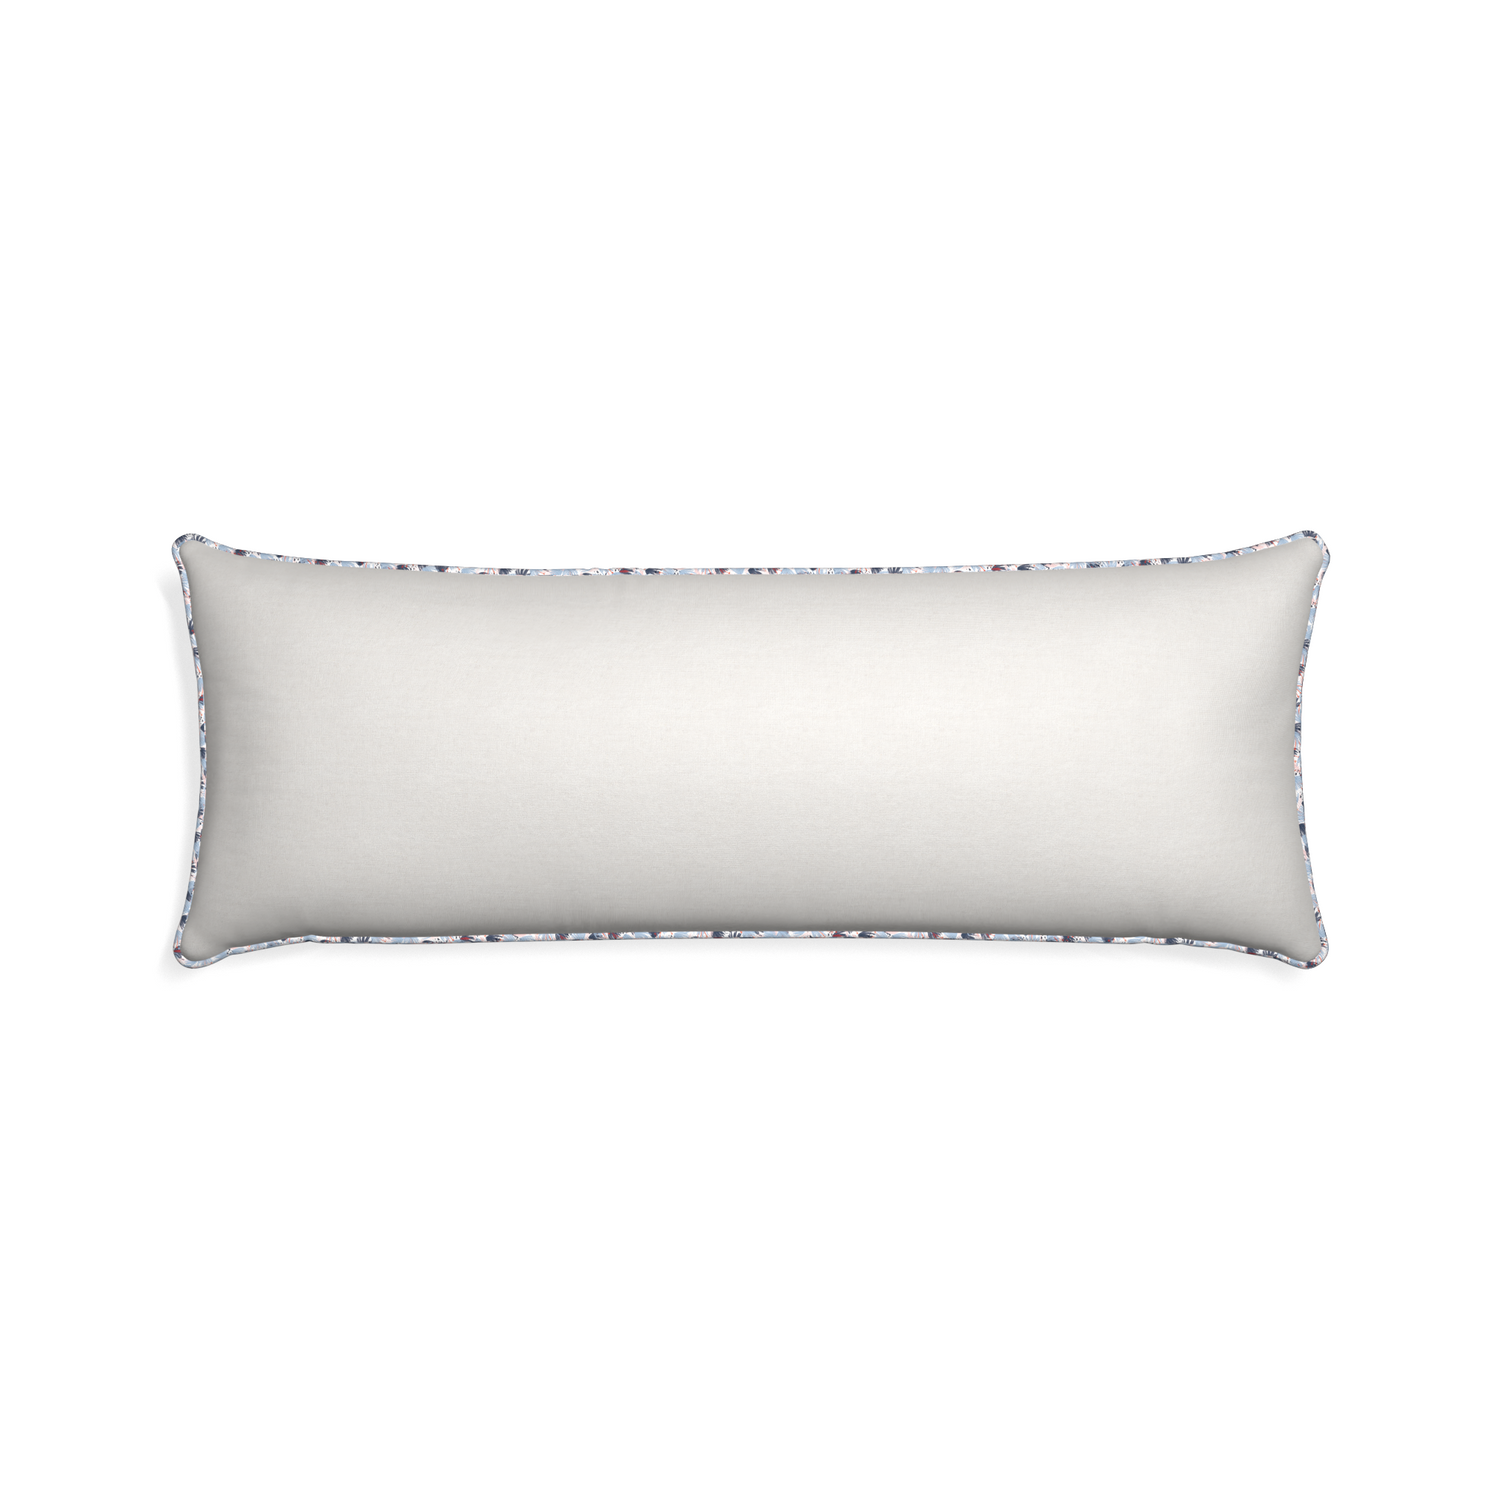 Xl-lumbar flour custom pillow with e piping on white background